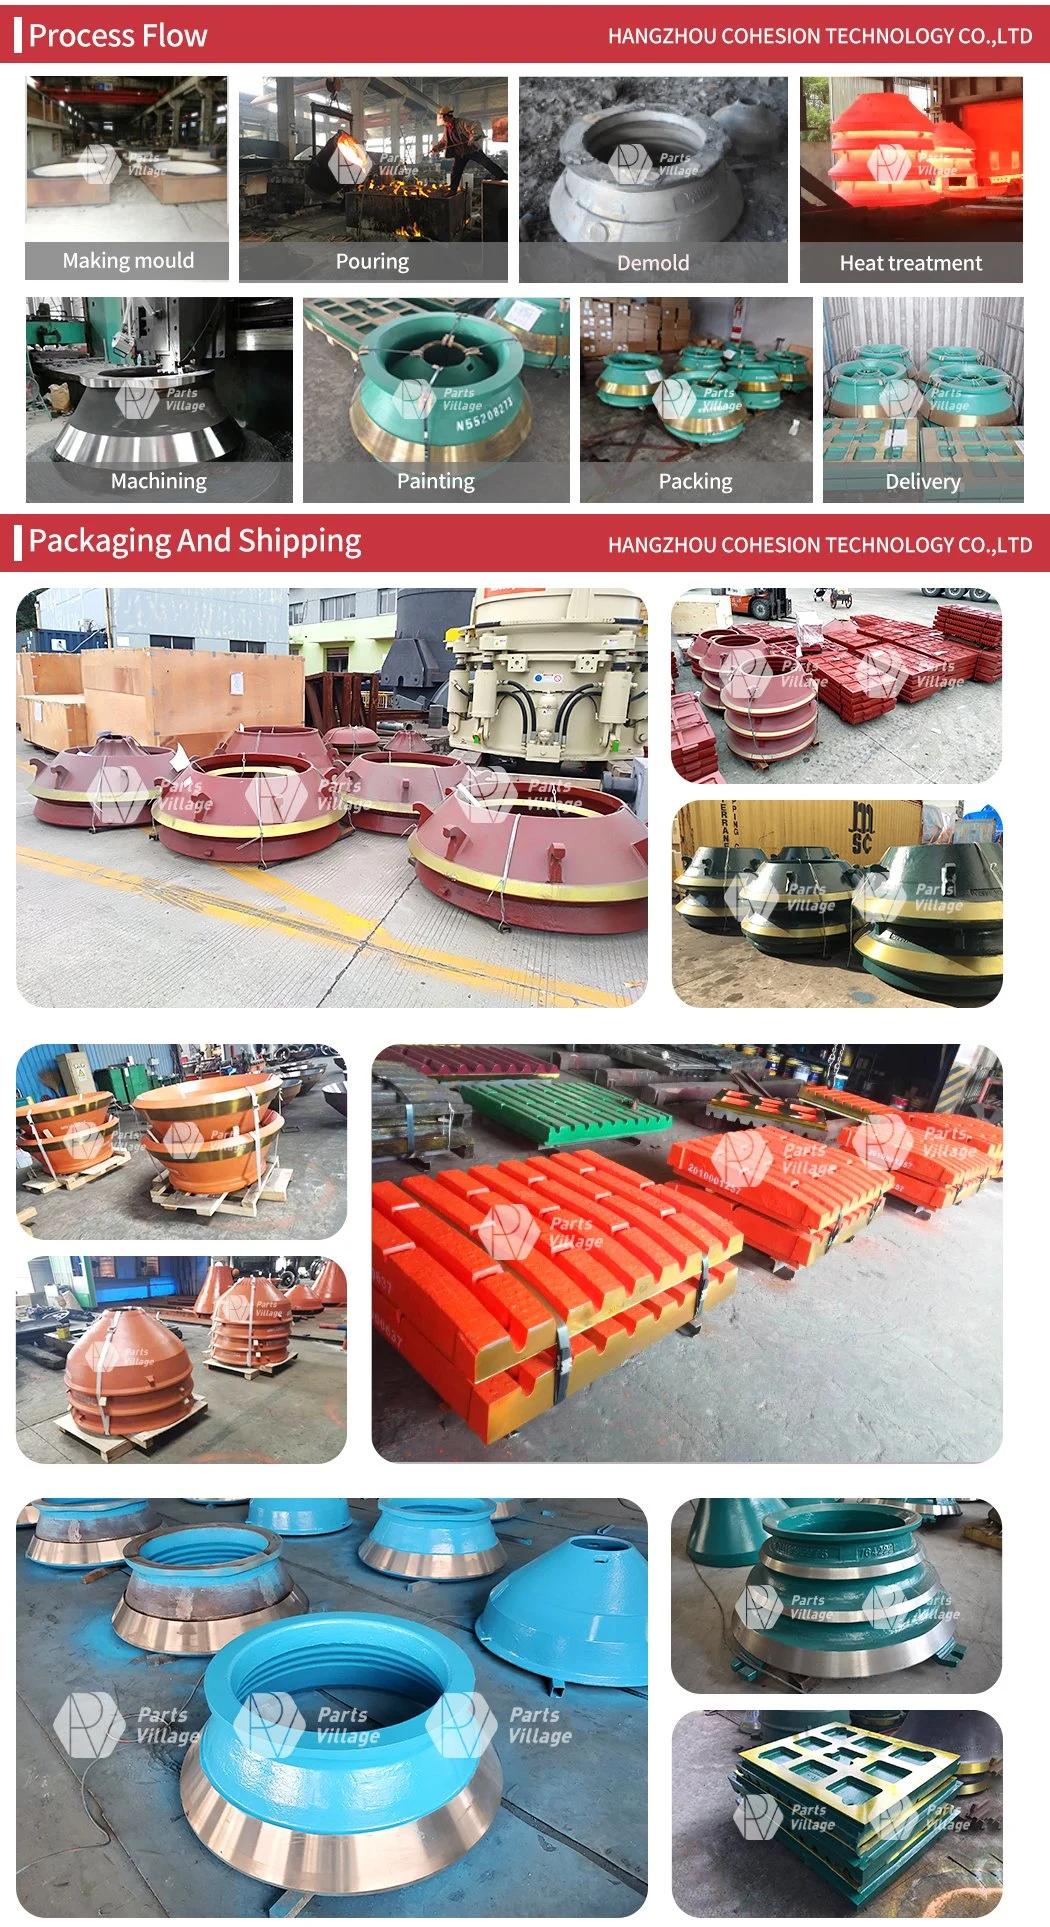 C100 C120 Jaw crusher same quality cheek plate protection plate